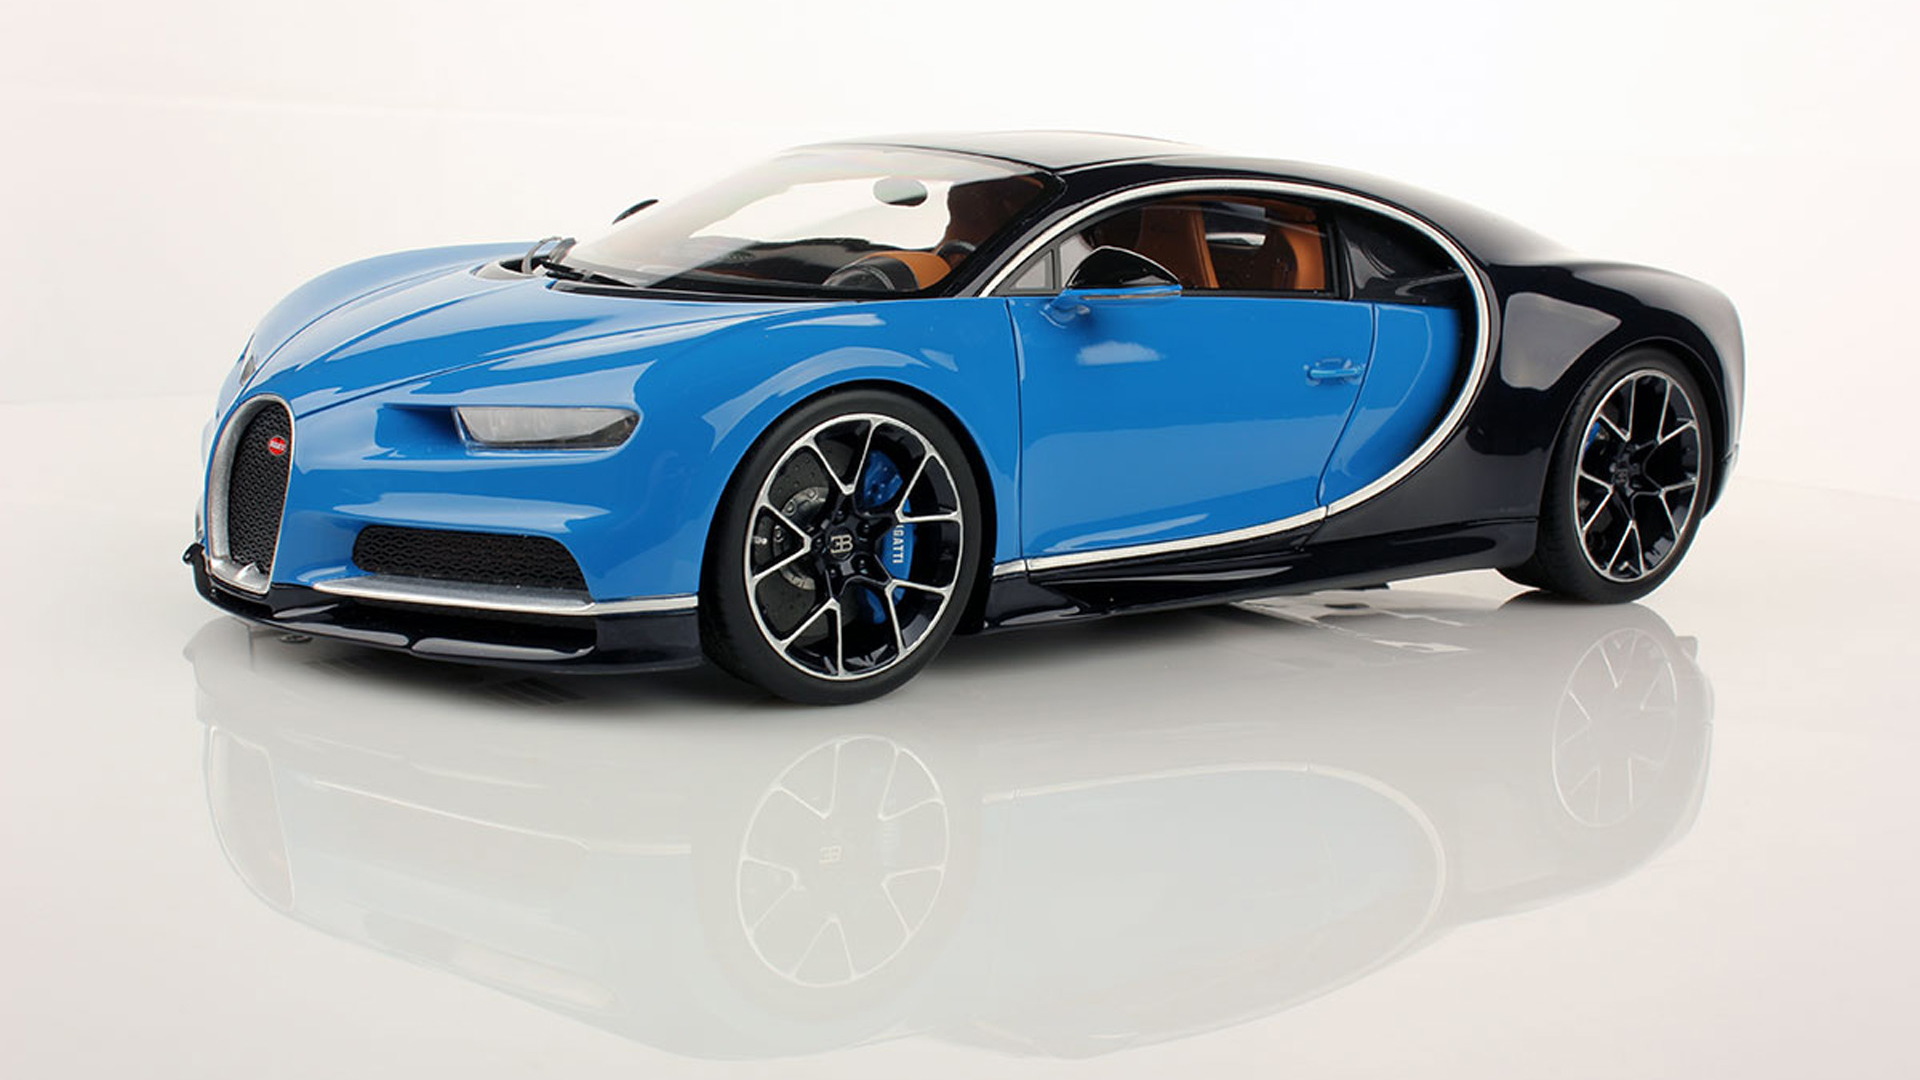 Bugatti Chiron 1:18 scale model by MR Collection Models